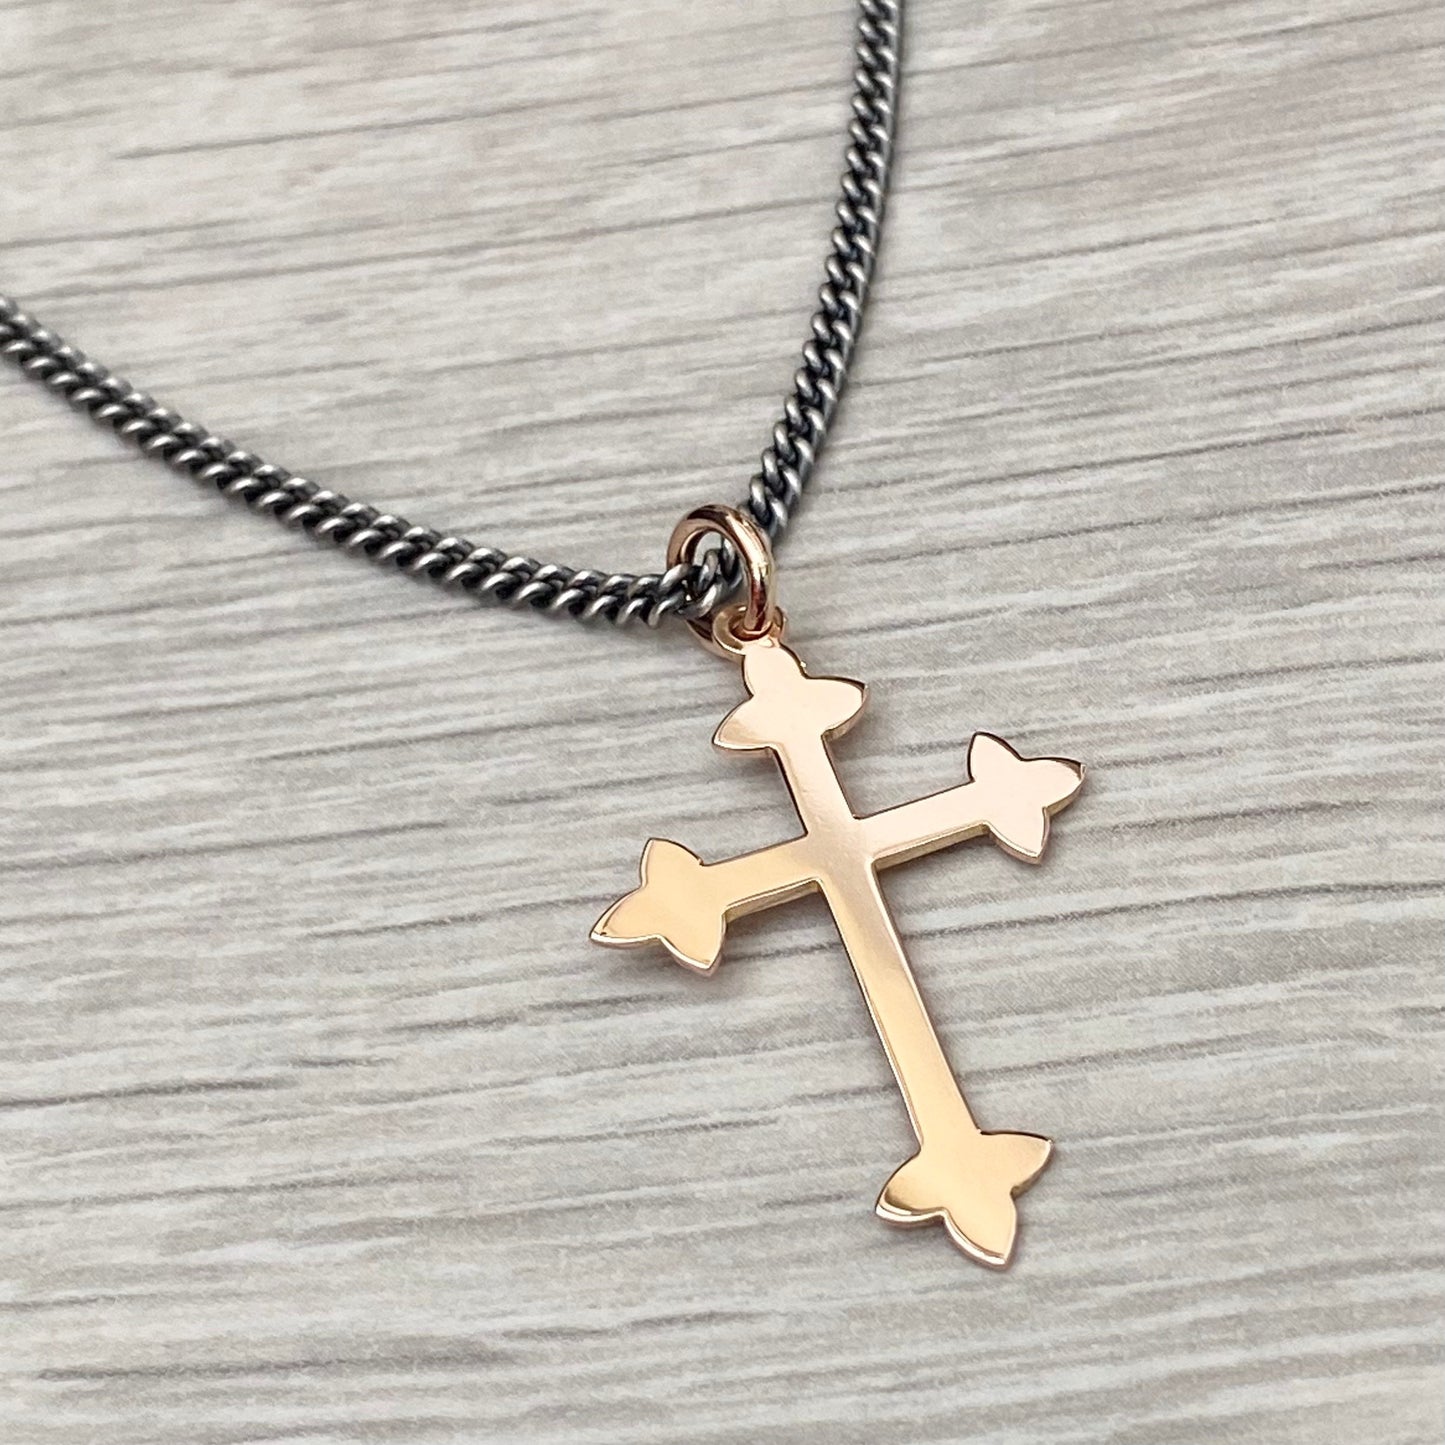 Vintage 9ct rose gold forked cross pendant on a new oxidised silver 2.4mm wide curb chain